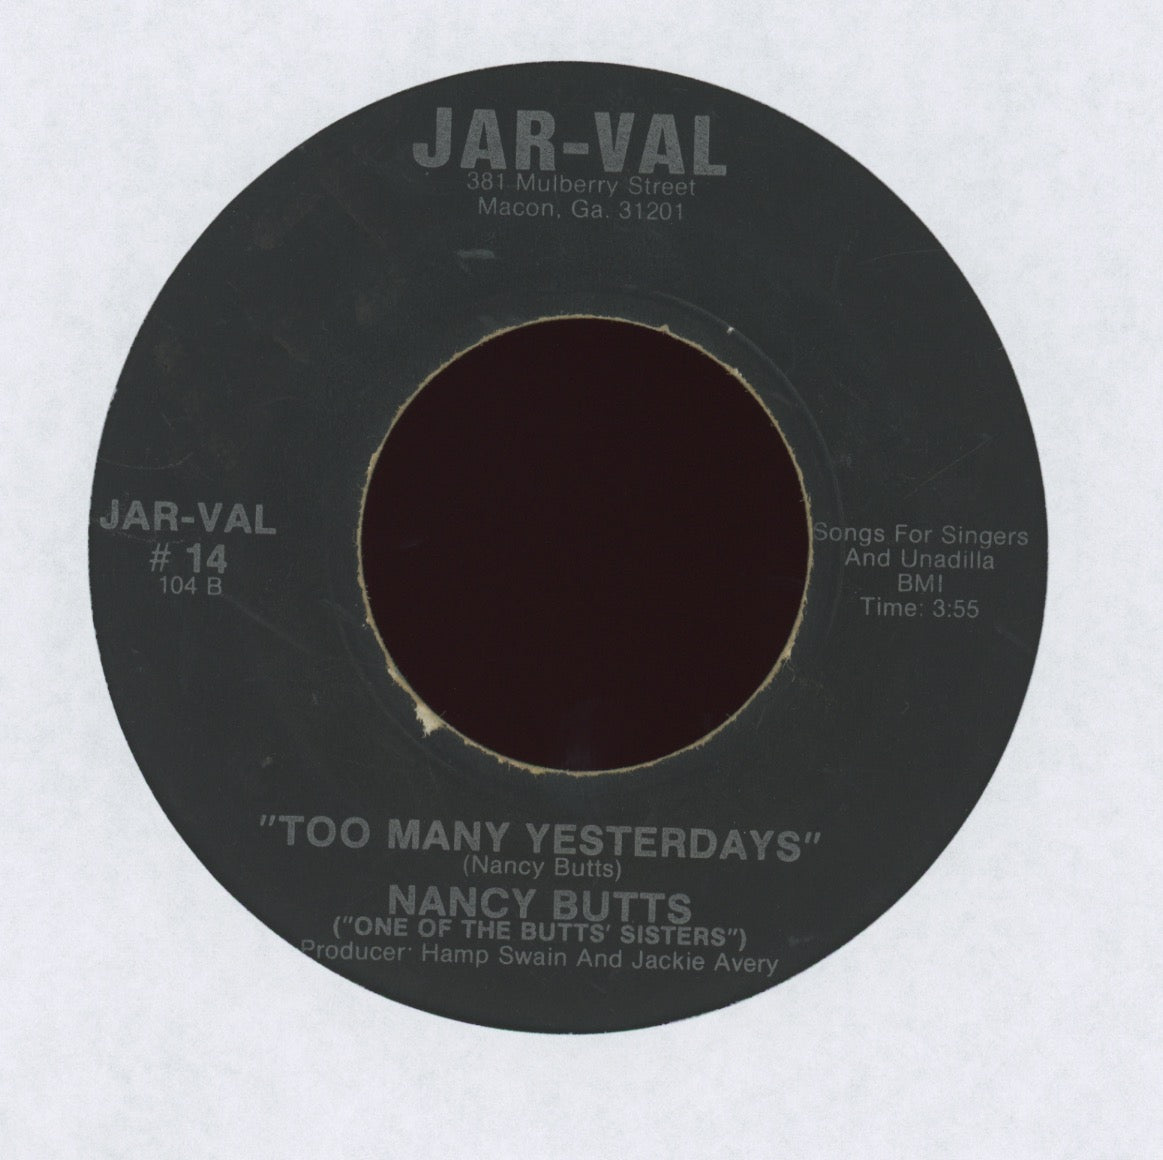 Nancy Butts - I Can't Love But One Man At A Time on Jar-Val